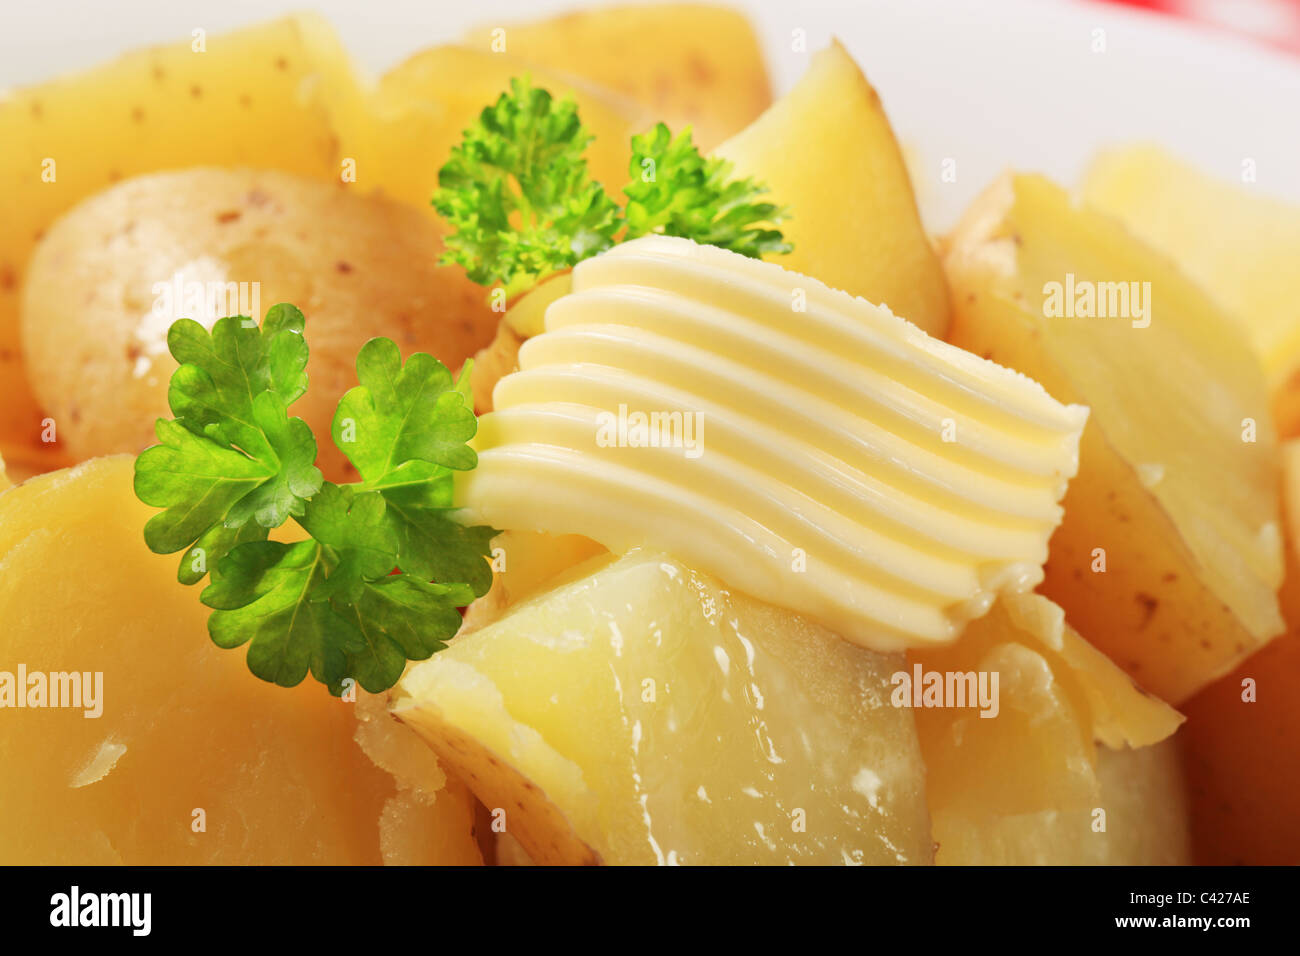 Bowl of potatoes boiled unpeeled - detail Stock Photo